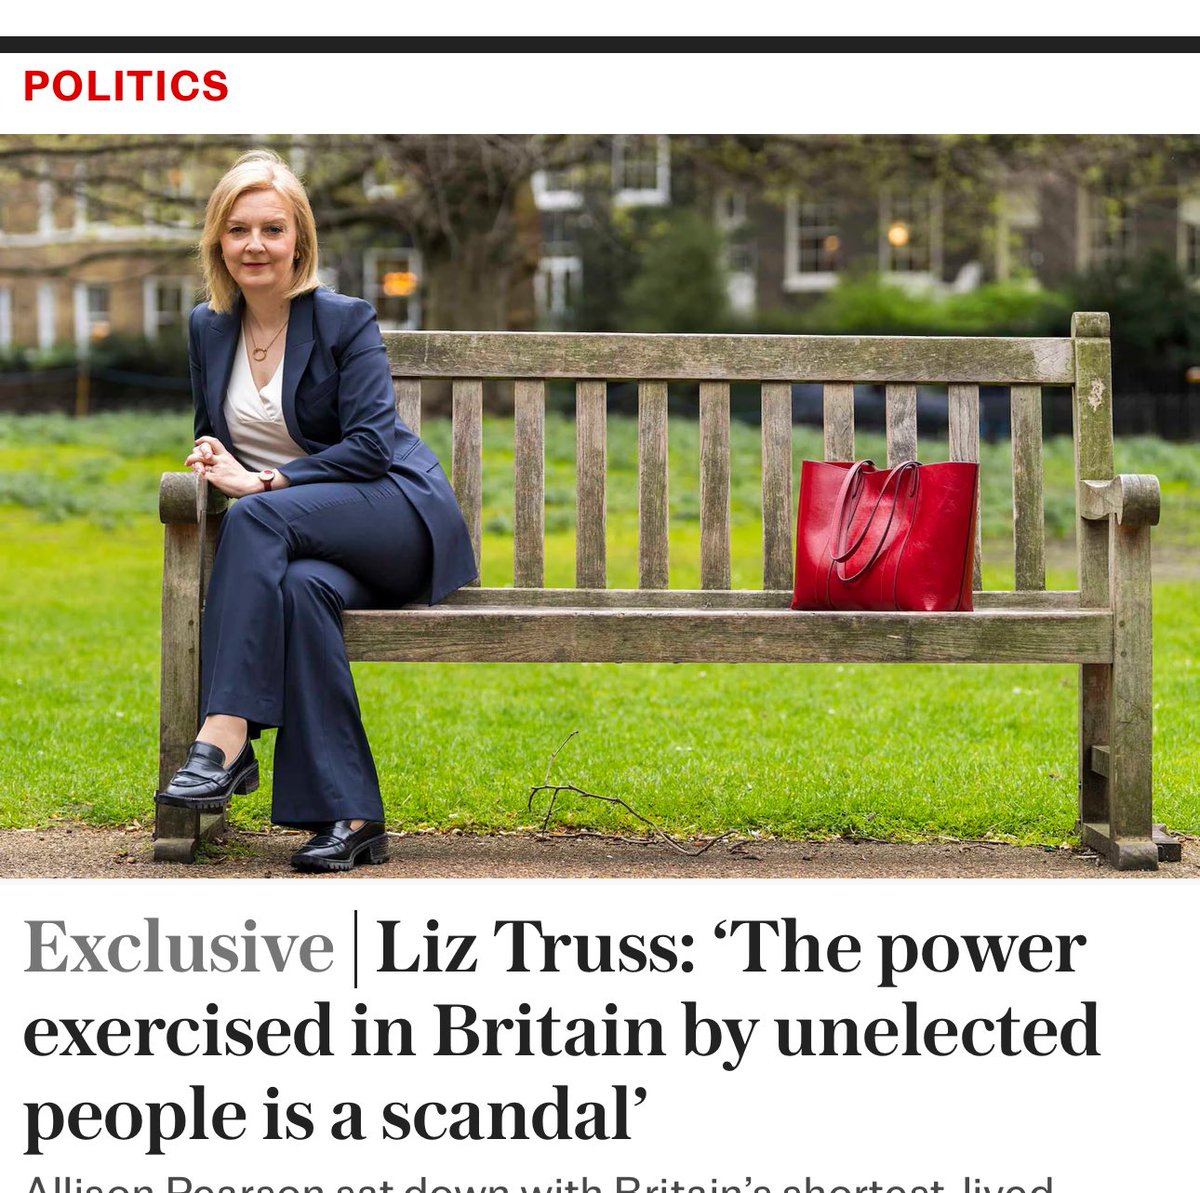 Do they mean Rishi? Or Truss herself? Utter lack of self-awareness. And that includes the Telegraph headline writer...